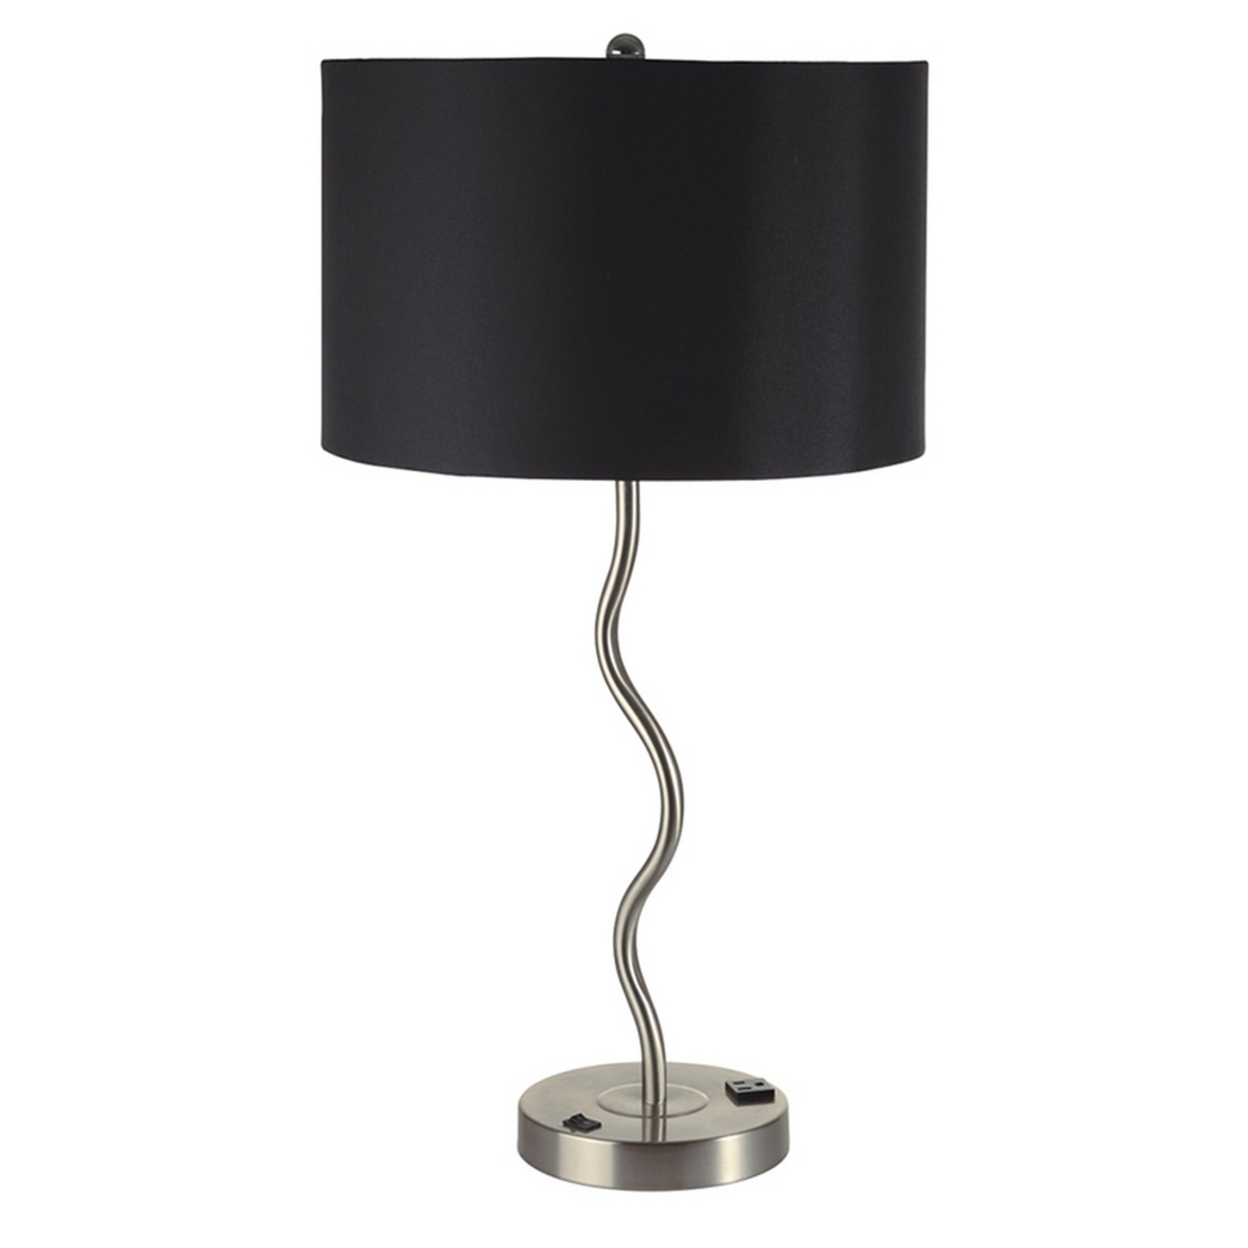 Table Lamp With Curved Tubular Body And Round Base, Black- Saltoro Sherpi